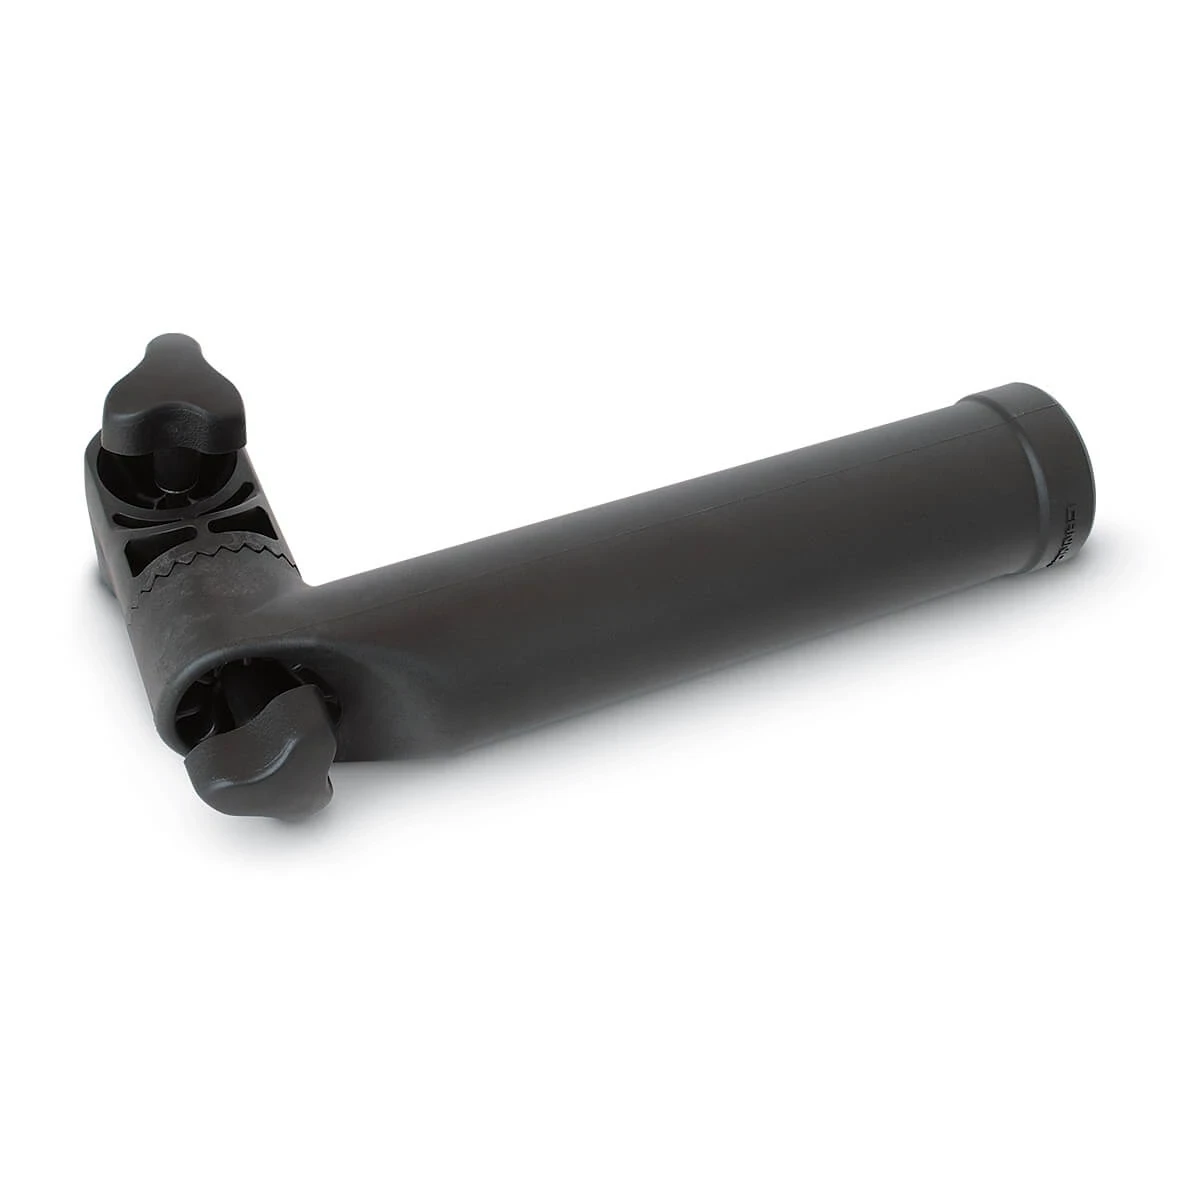 Black composite rod holder that mounts direct to downrigger and has two joints